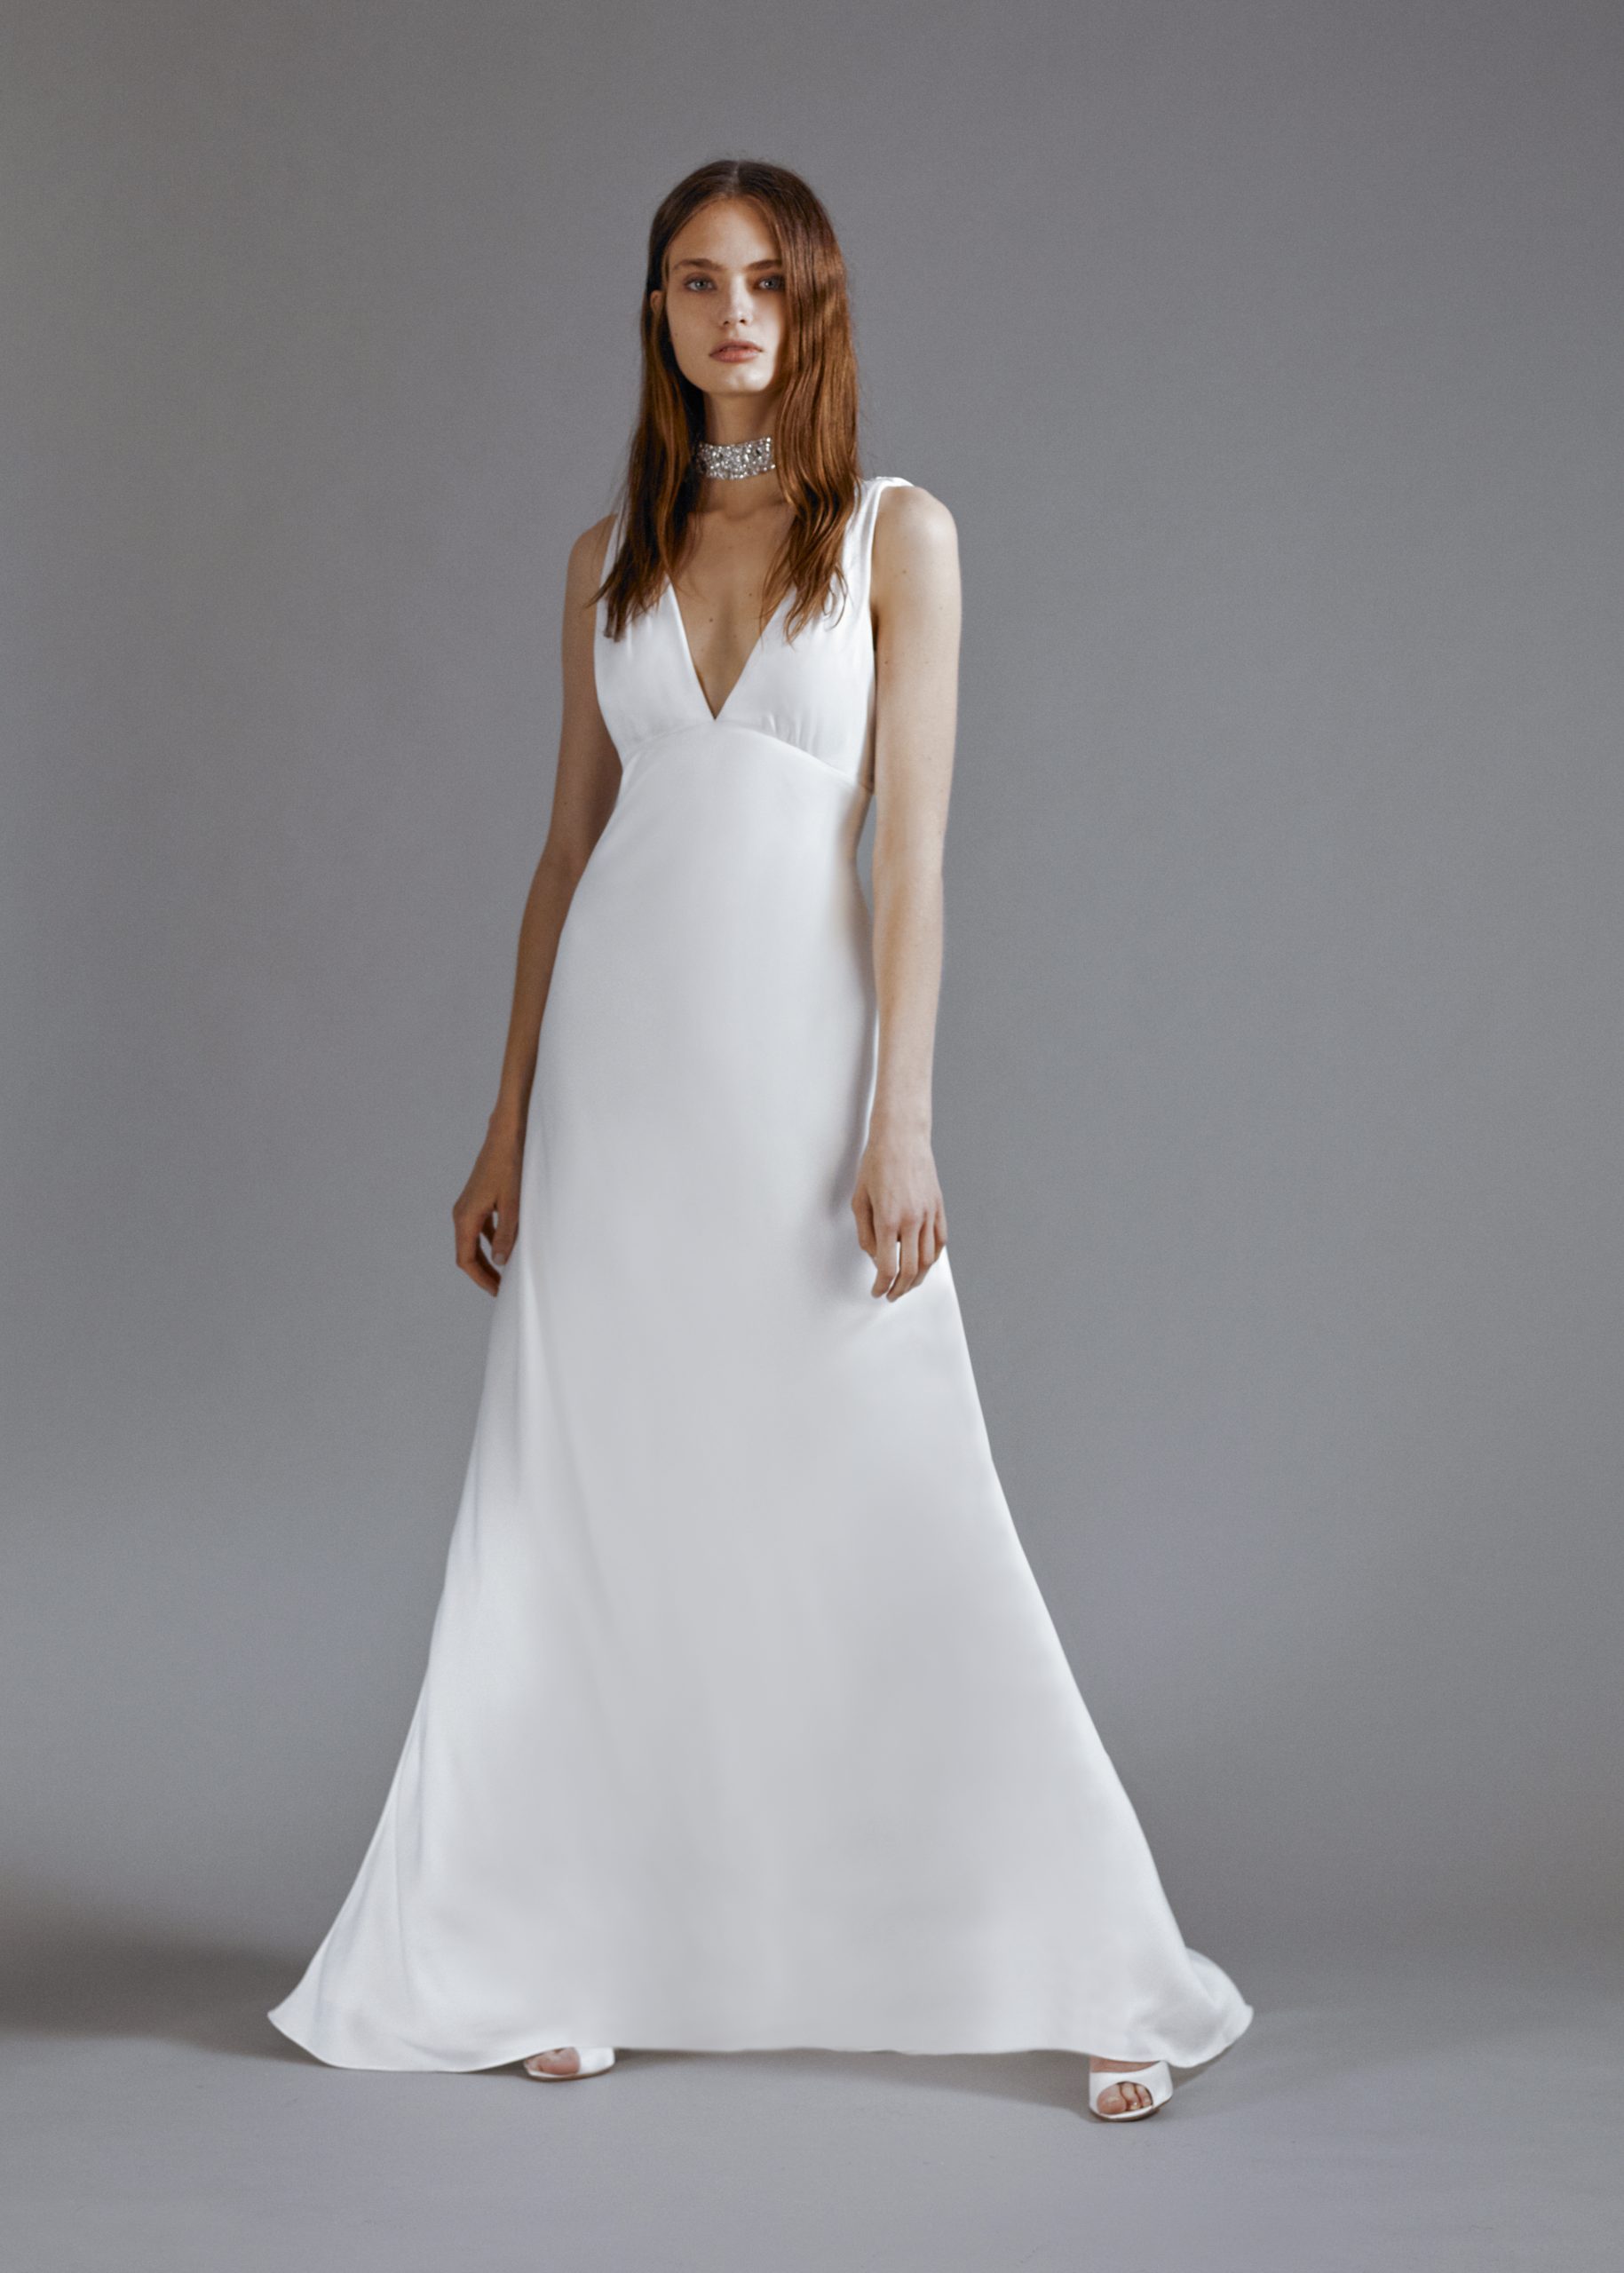 Simple, Chic Wedding Gowns For The Modern Bride - Loverly